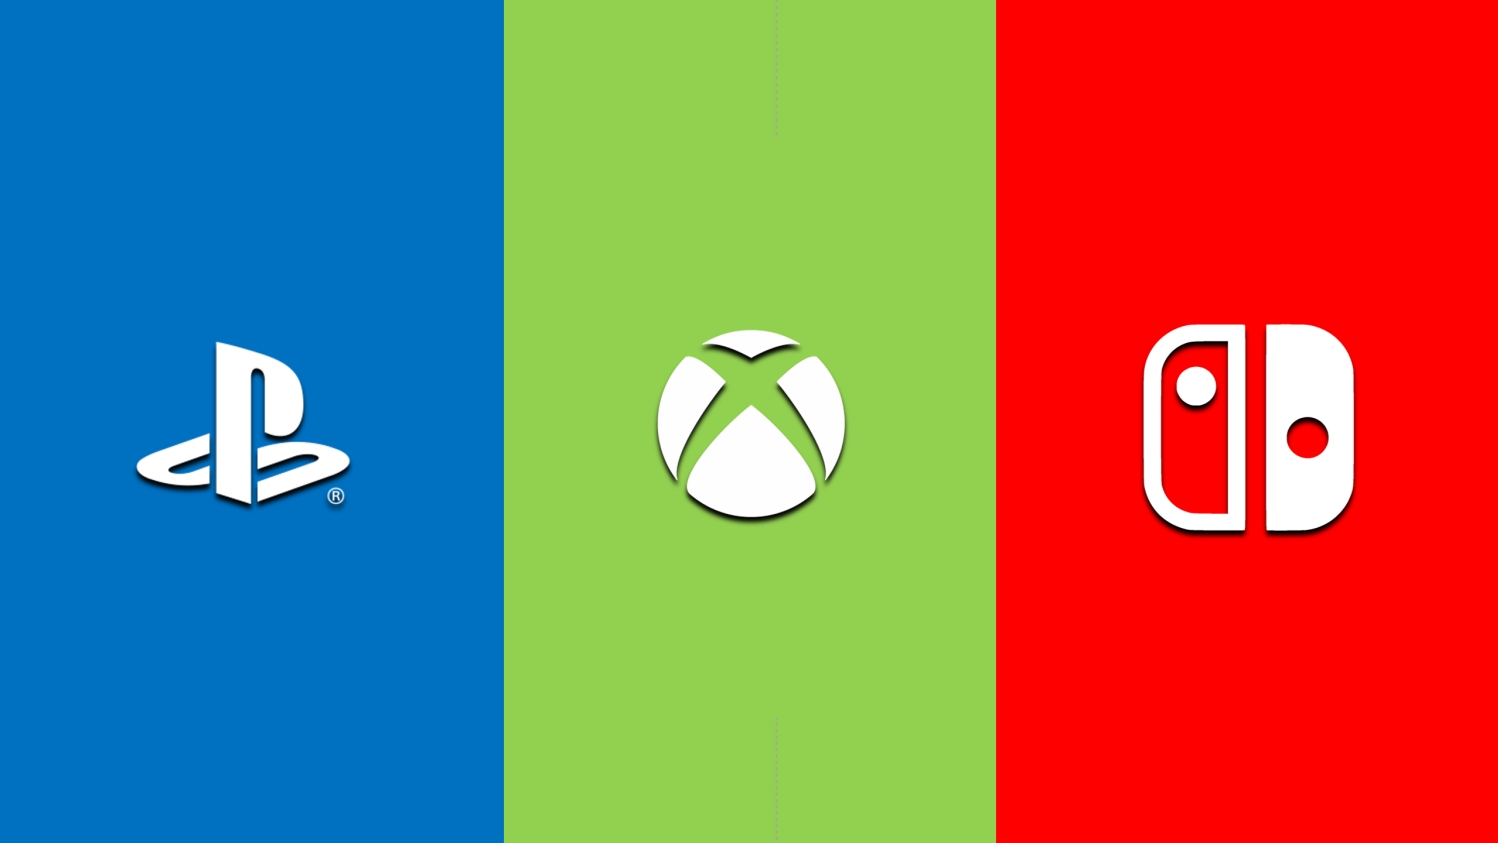 Xbox One vs. PS4 vs. Switch: Comparing the current gaming consoles